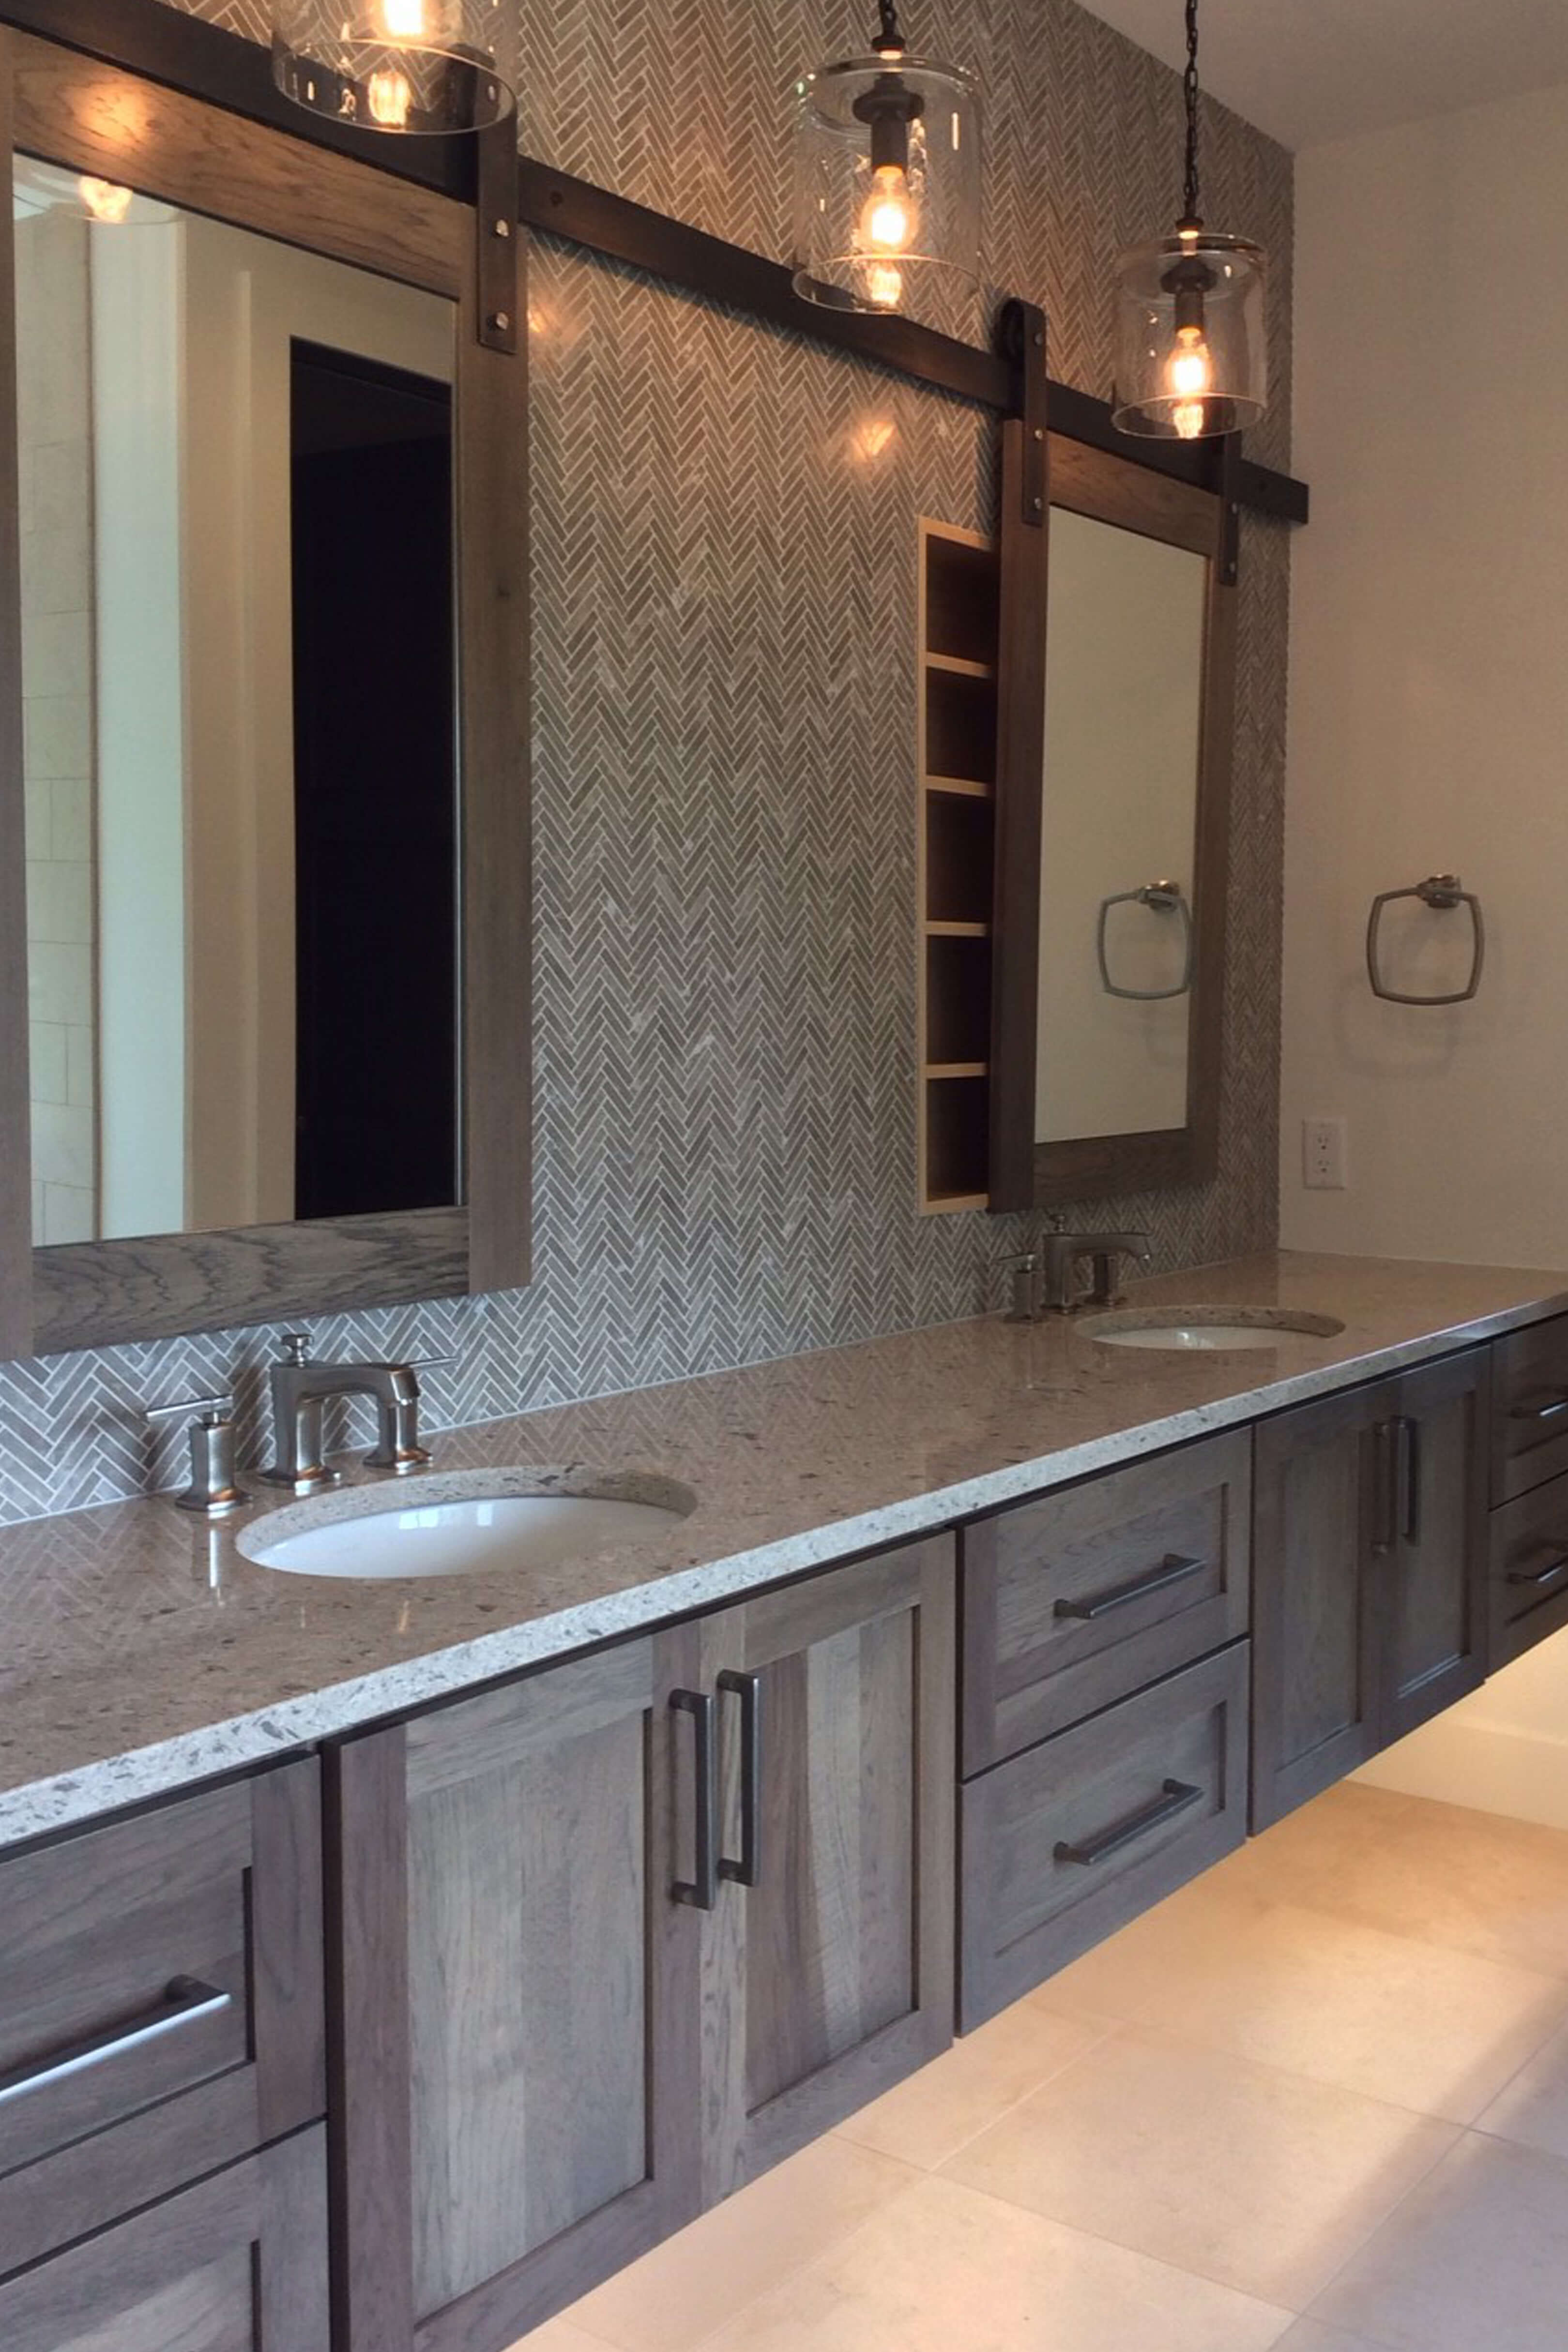 A modern rustic floating vanity cabinet with double sinks using full overlay shaker door styles in a gray stained Hickory wood. Barn door style hardware is used for the medicine cabinet mirrors to create sliding mirror doors.